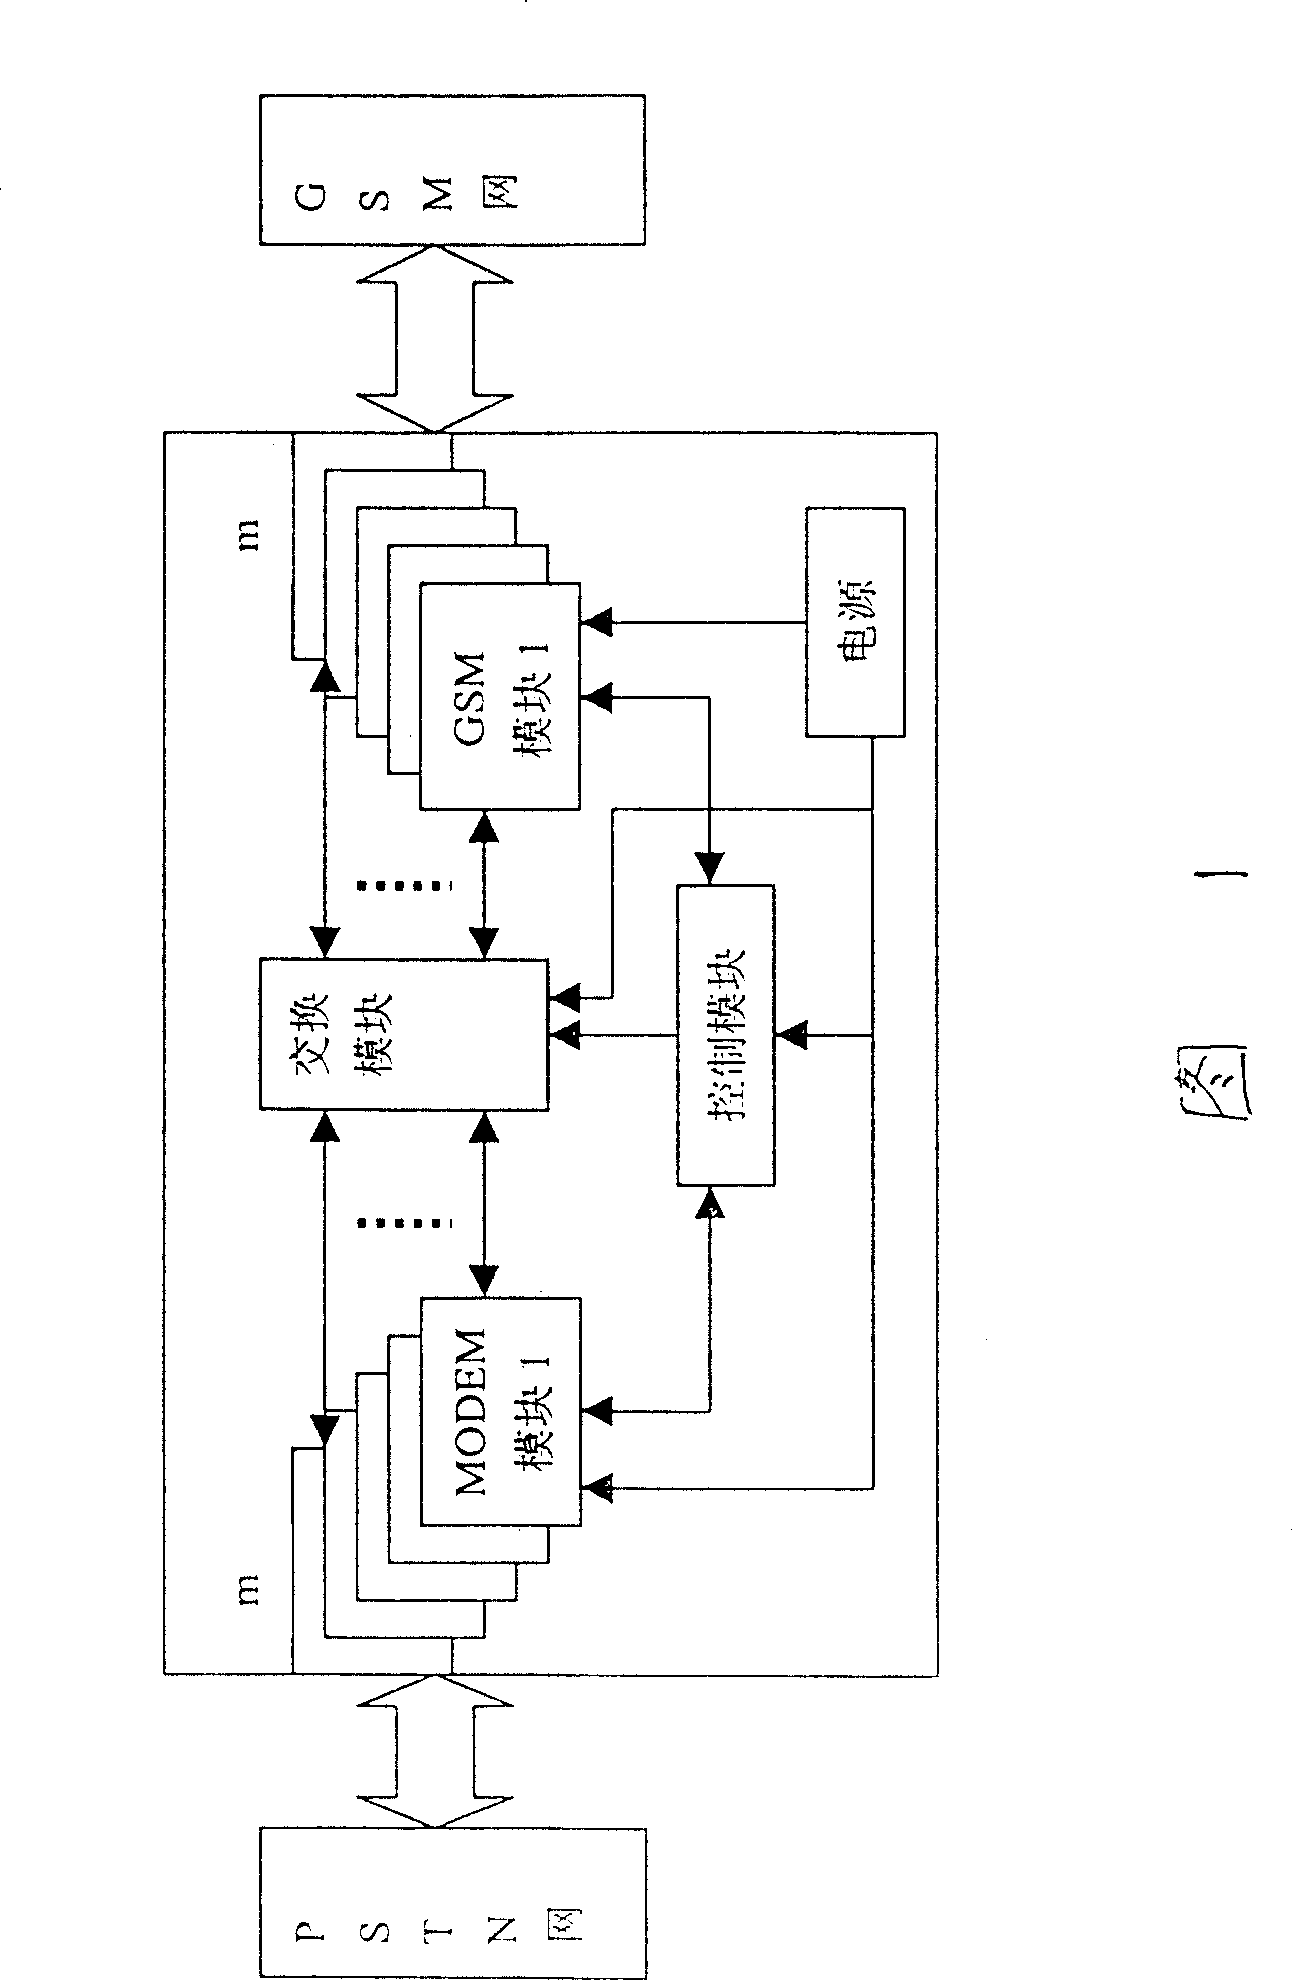 Apparatus and method for implementing end-to-end encrypted communication between line telephone and GSM handset